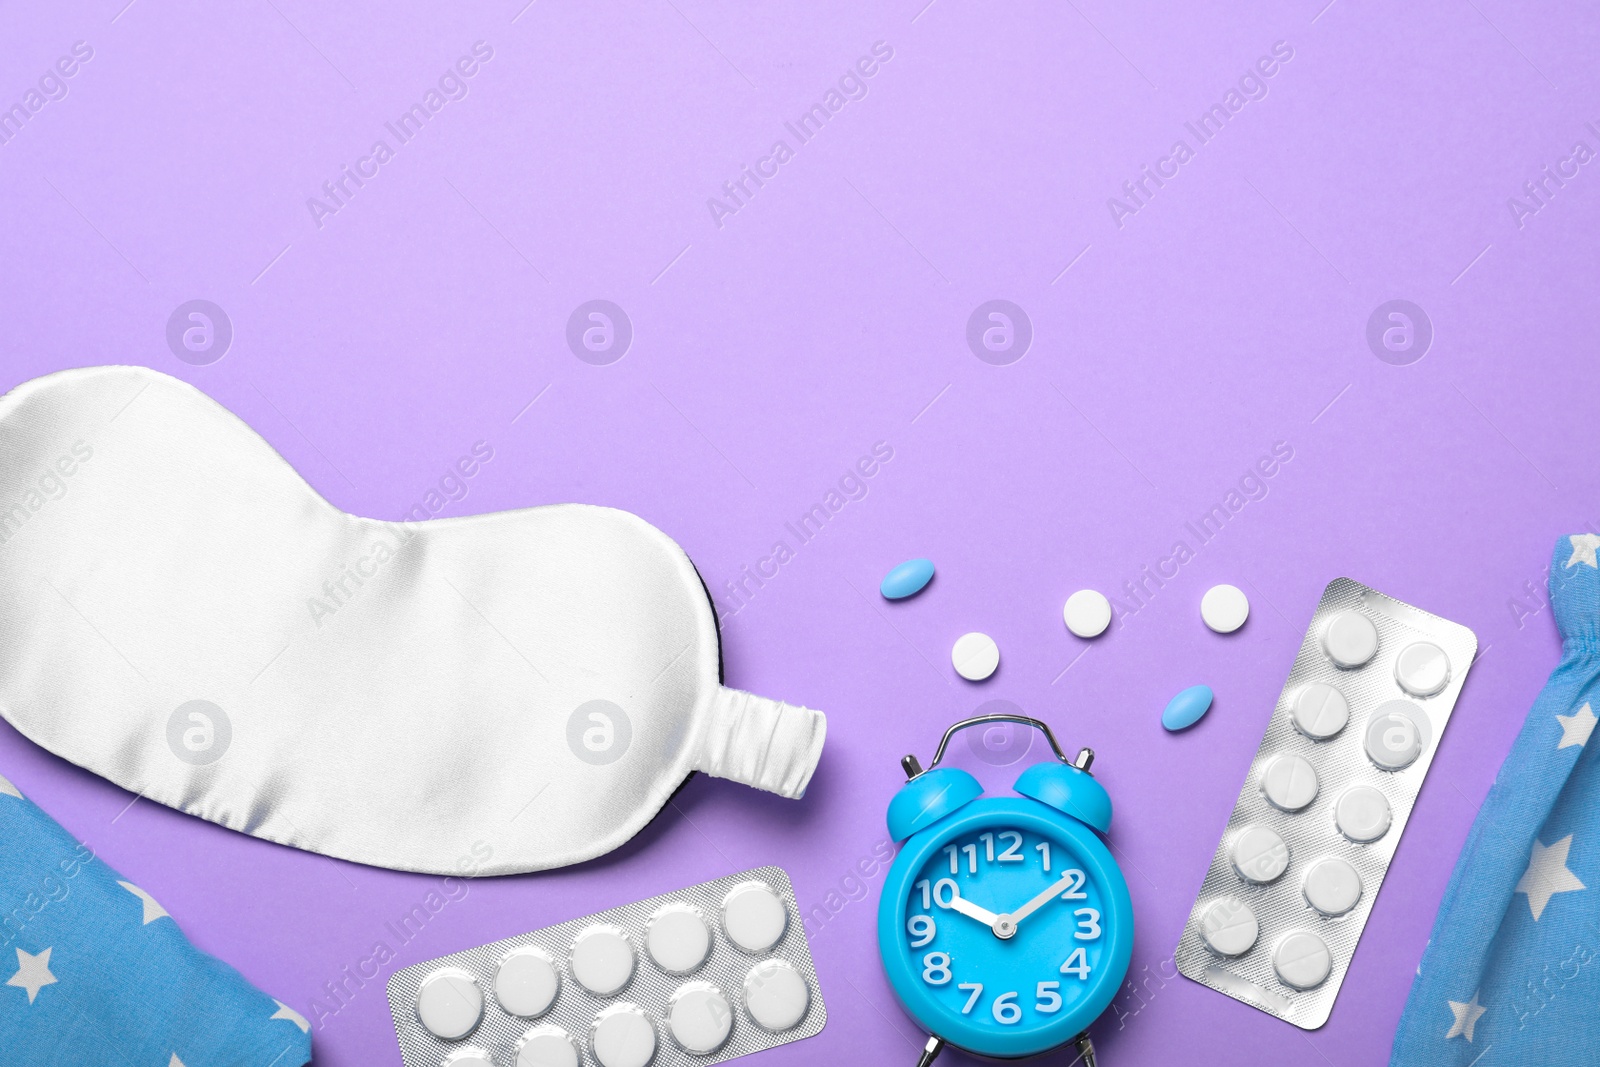 Photo of Flat lay composition with sleeping mask on violet background, space for text. Bedtime accessories